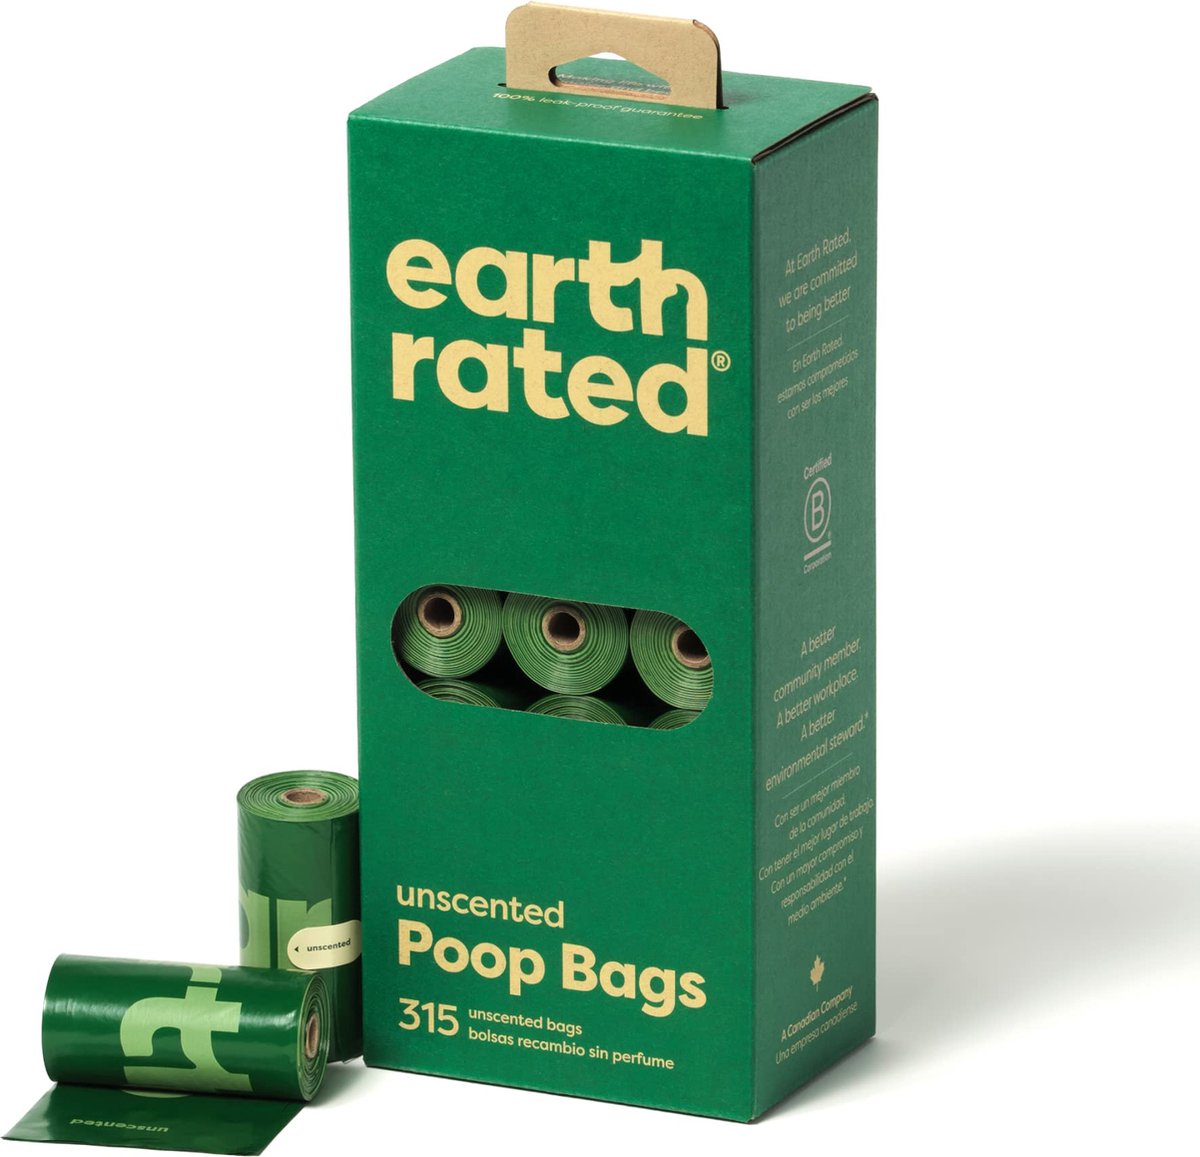 Earth Rated Eco Poepzakjes Geurloos 21 x 15 zakjes - Earth Rated